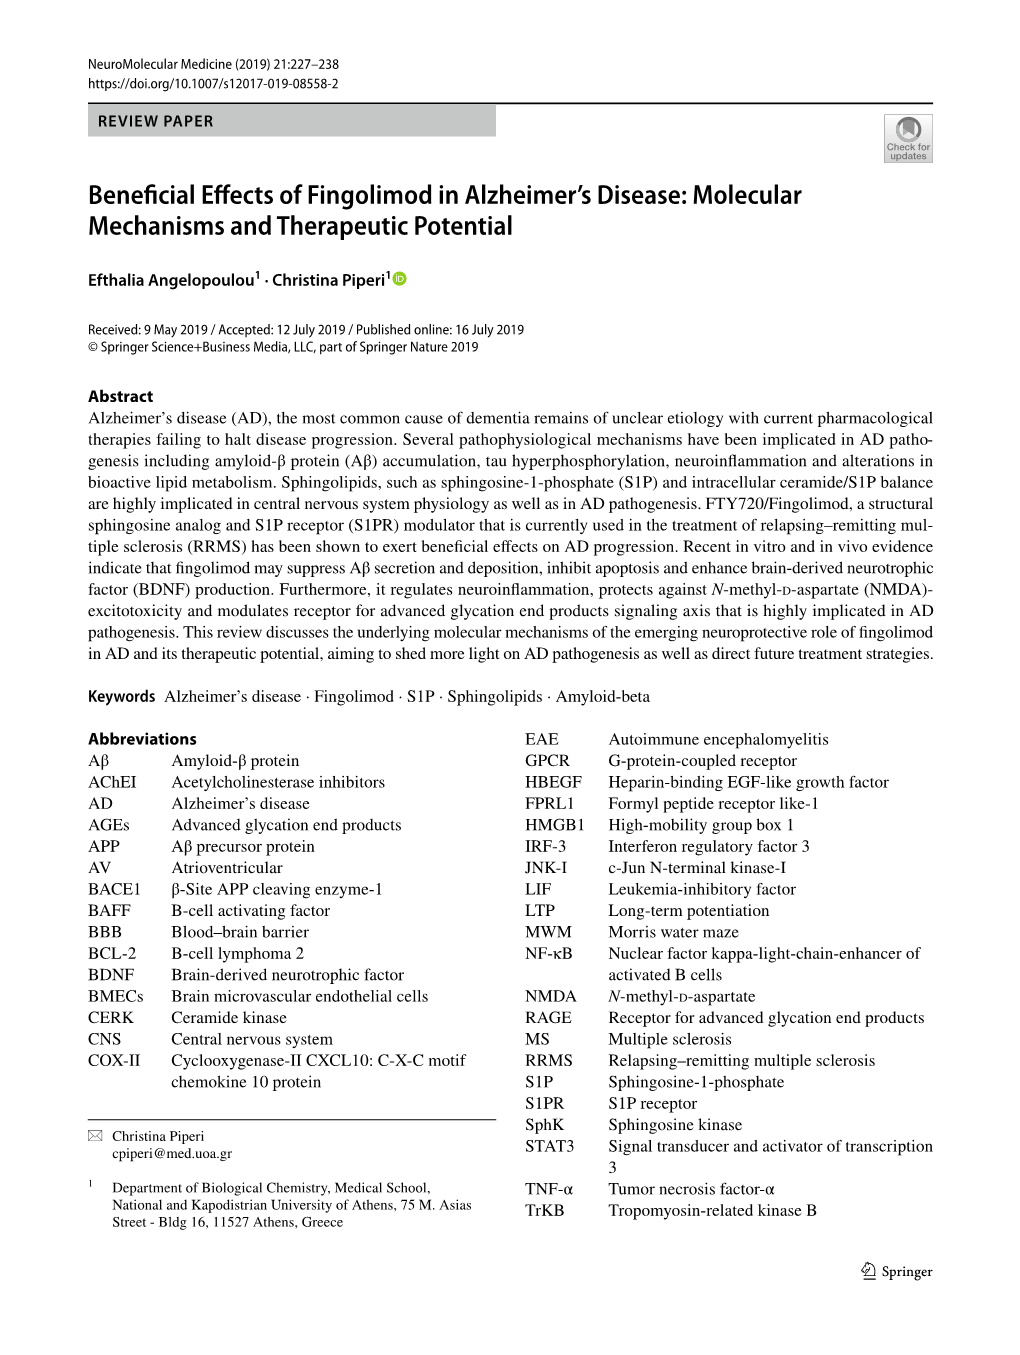 Beneficial Effects of Fingolimod in Alzheimer's Disease: Molecular